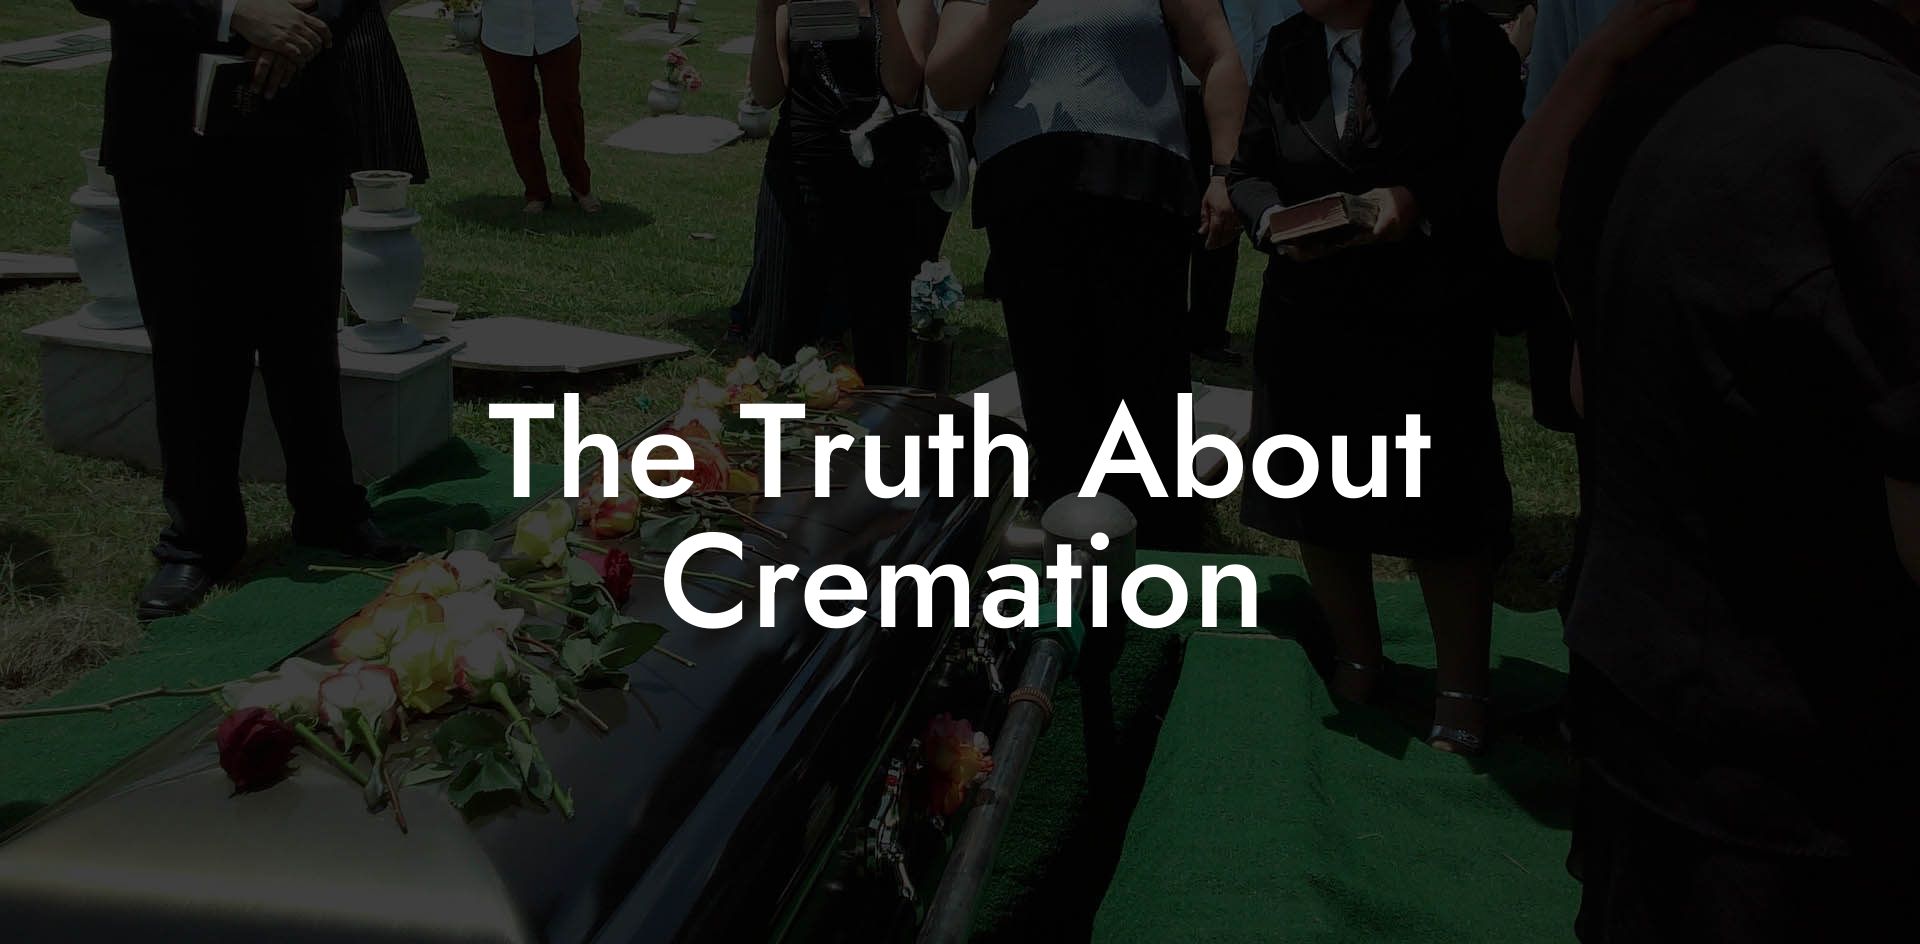 The Truth About Cremation